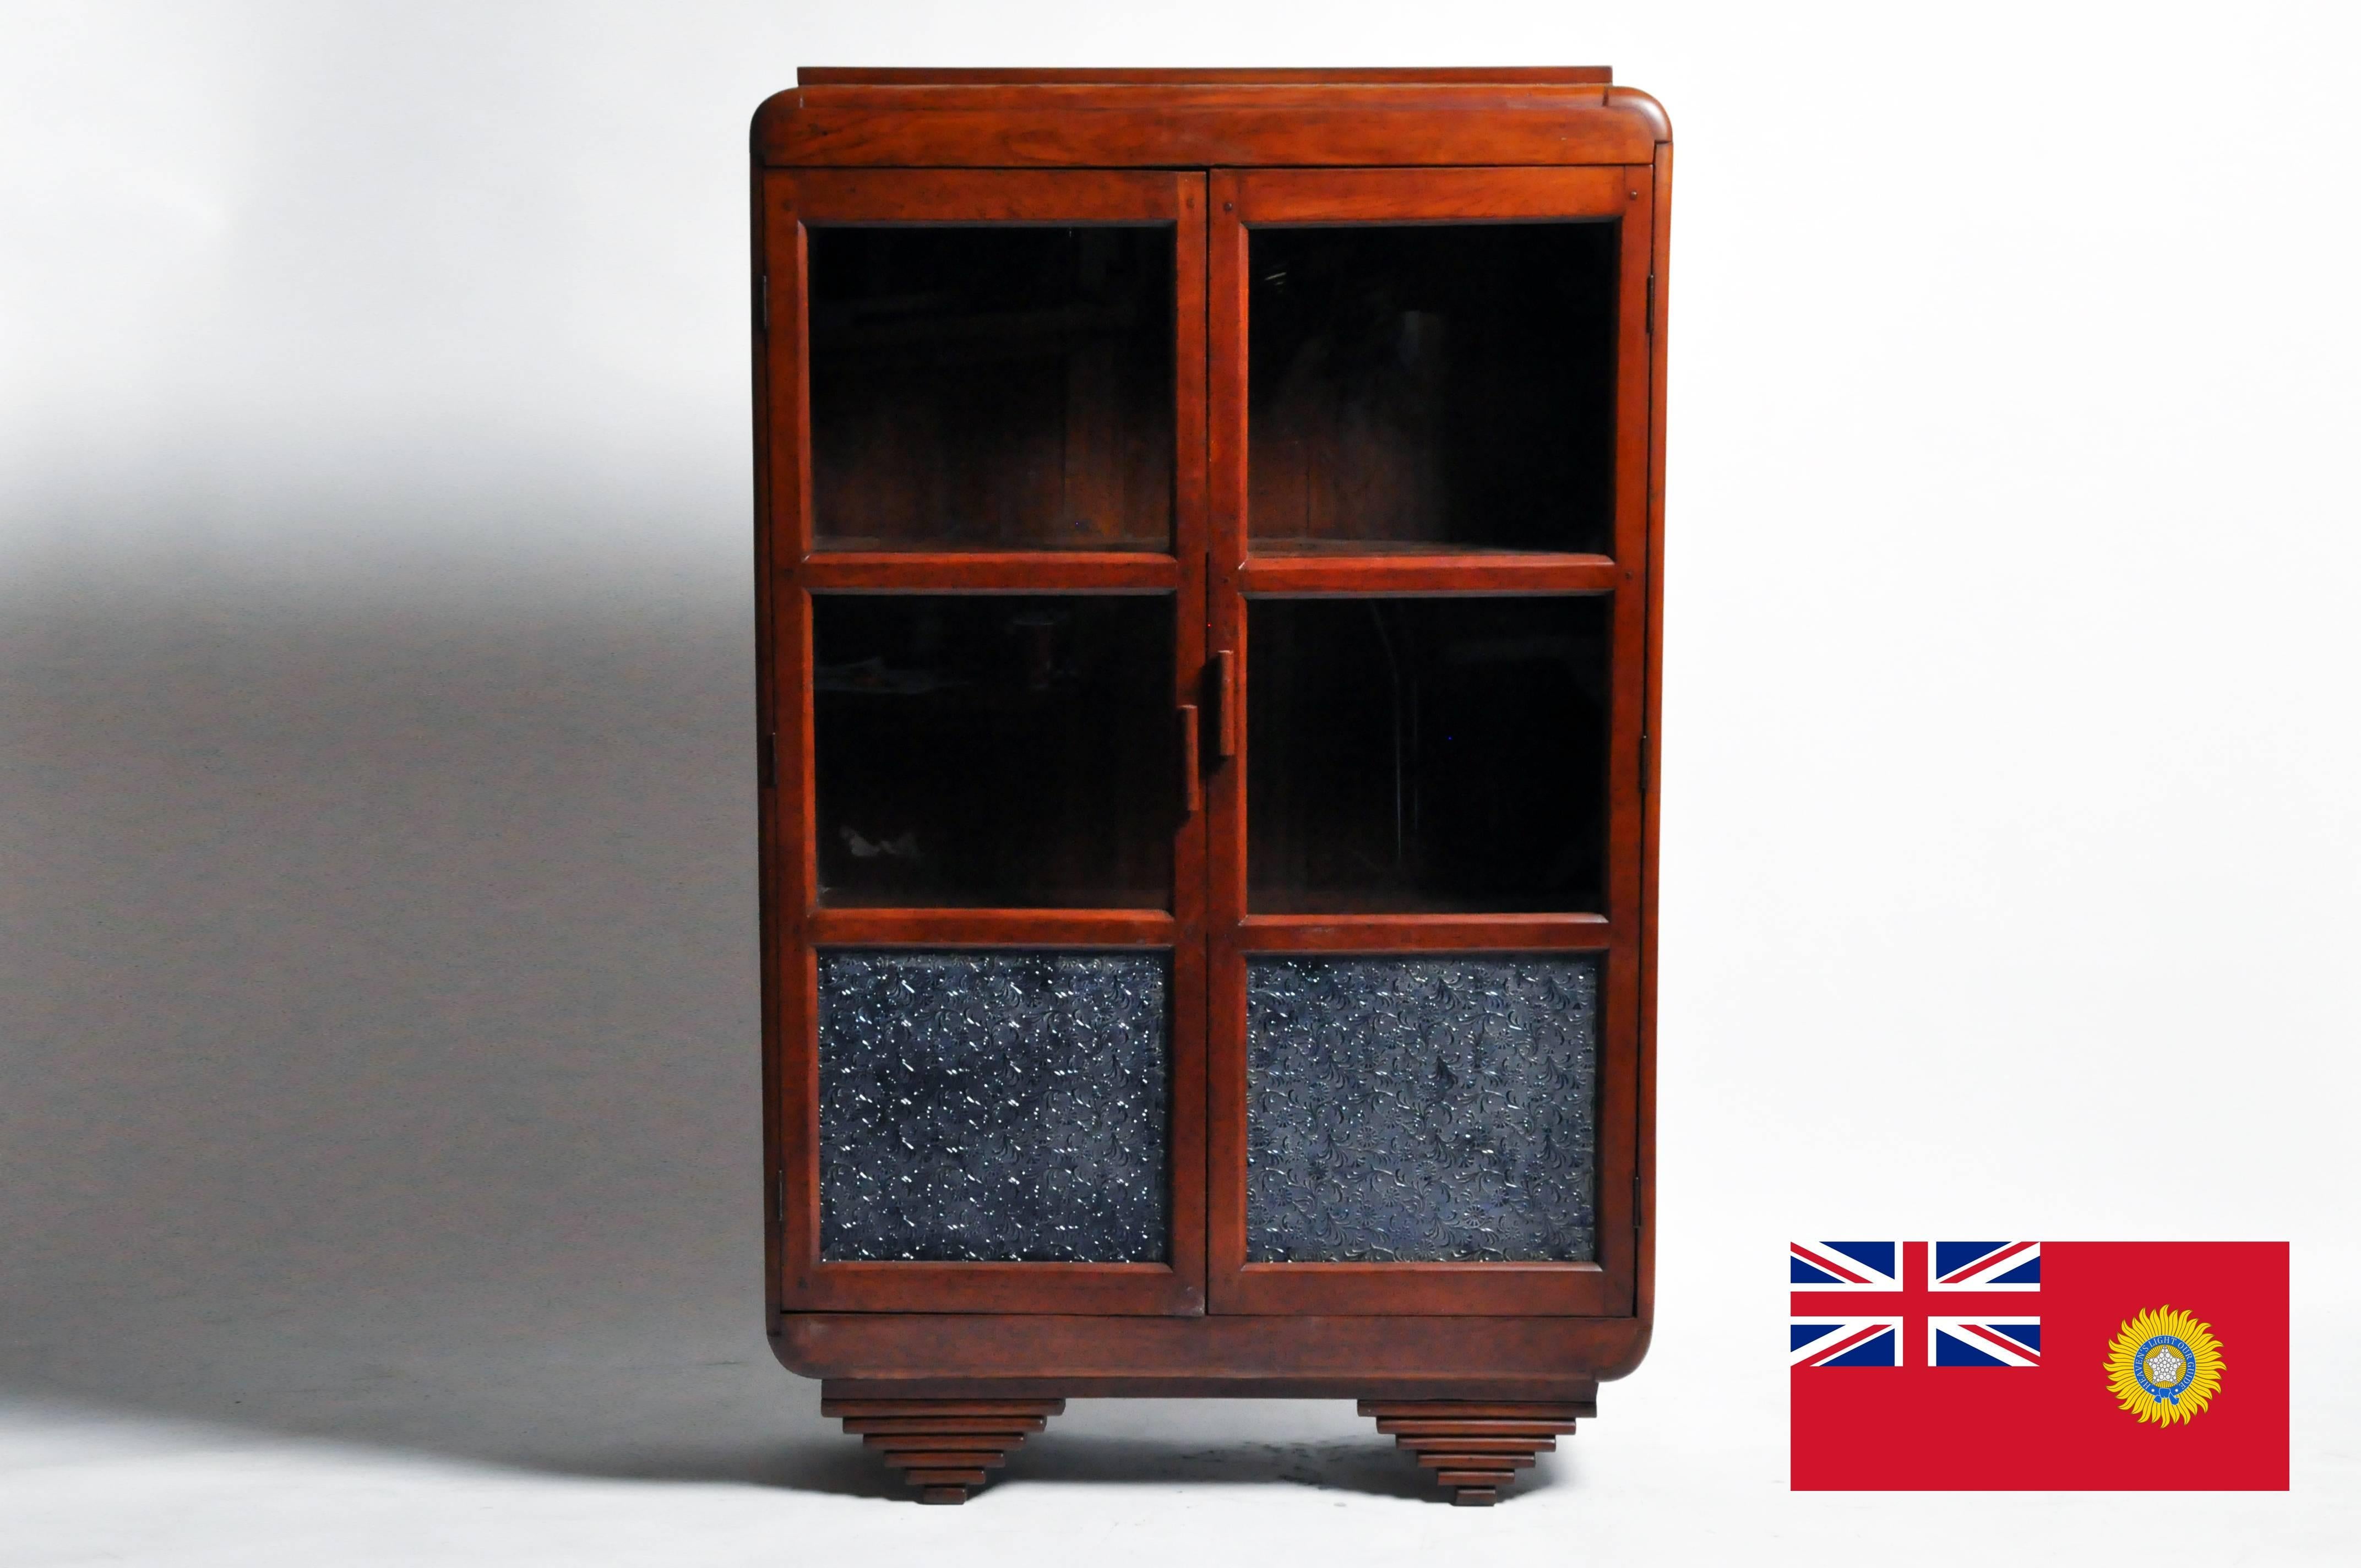 This charming British Colonial Art Deco display cabinet would also make a wonderful hutch. The piece features 2 blue frosted glass and while the beautifully aged patina emits a warm glow. Made from teak wood the piece also has a natural insect